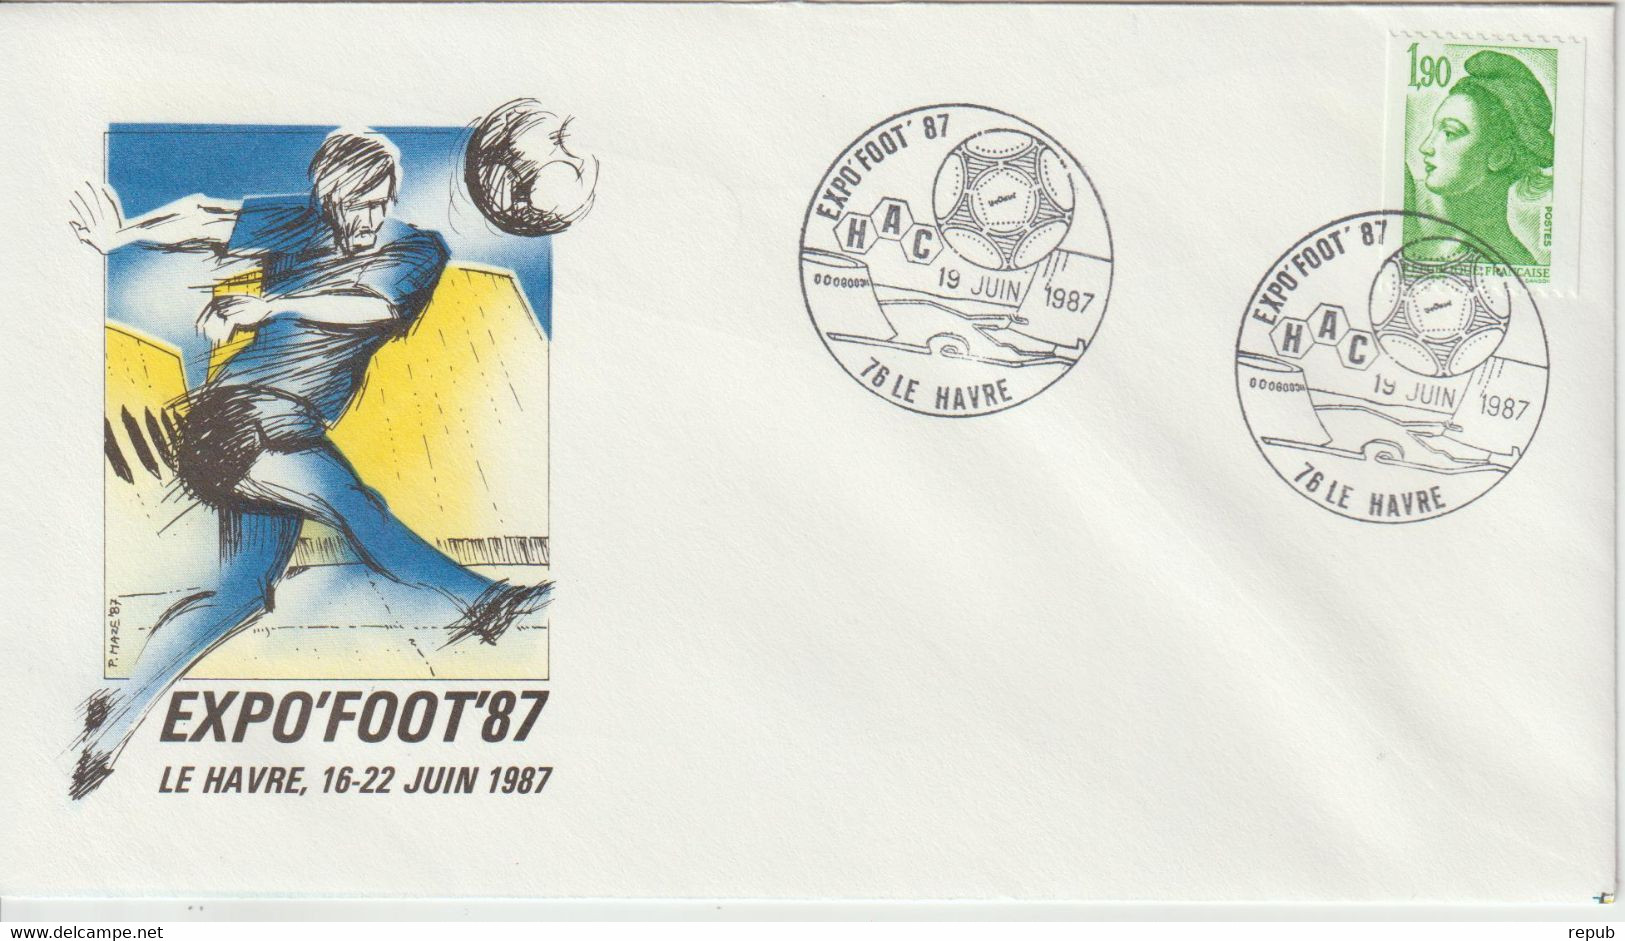 France 1987 Le Havre Expo Foot 87 - Commemorative Postmarks